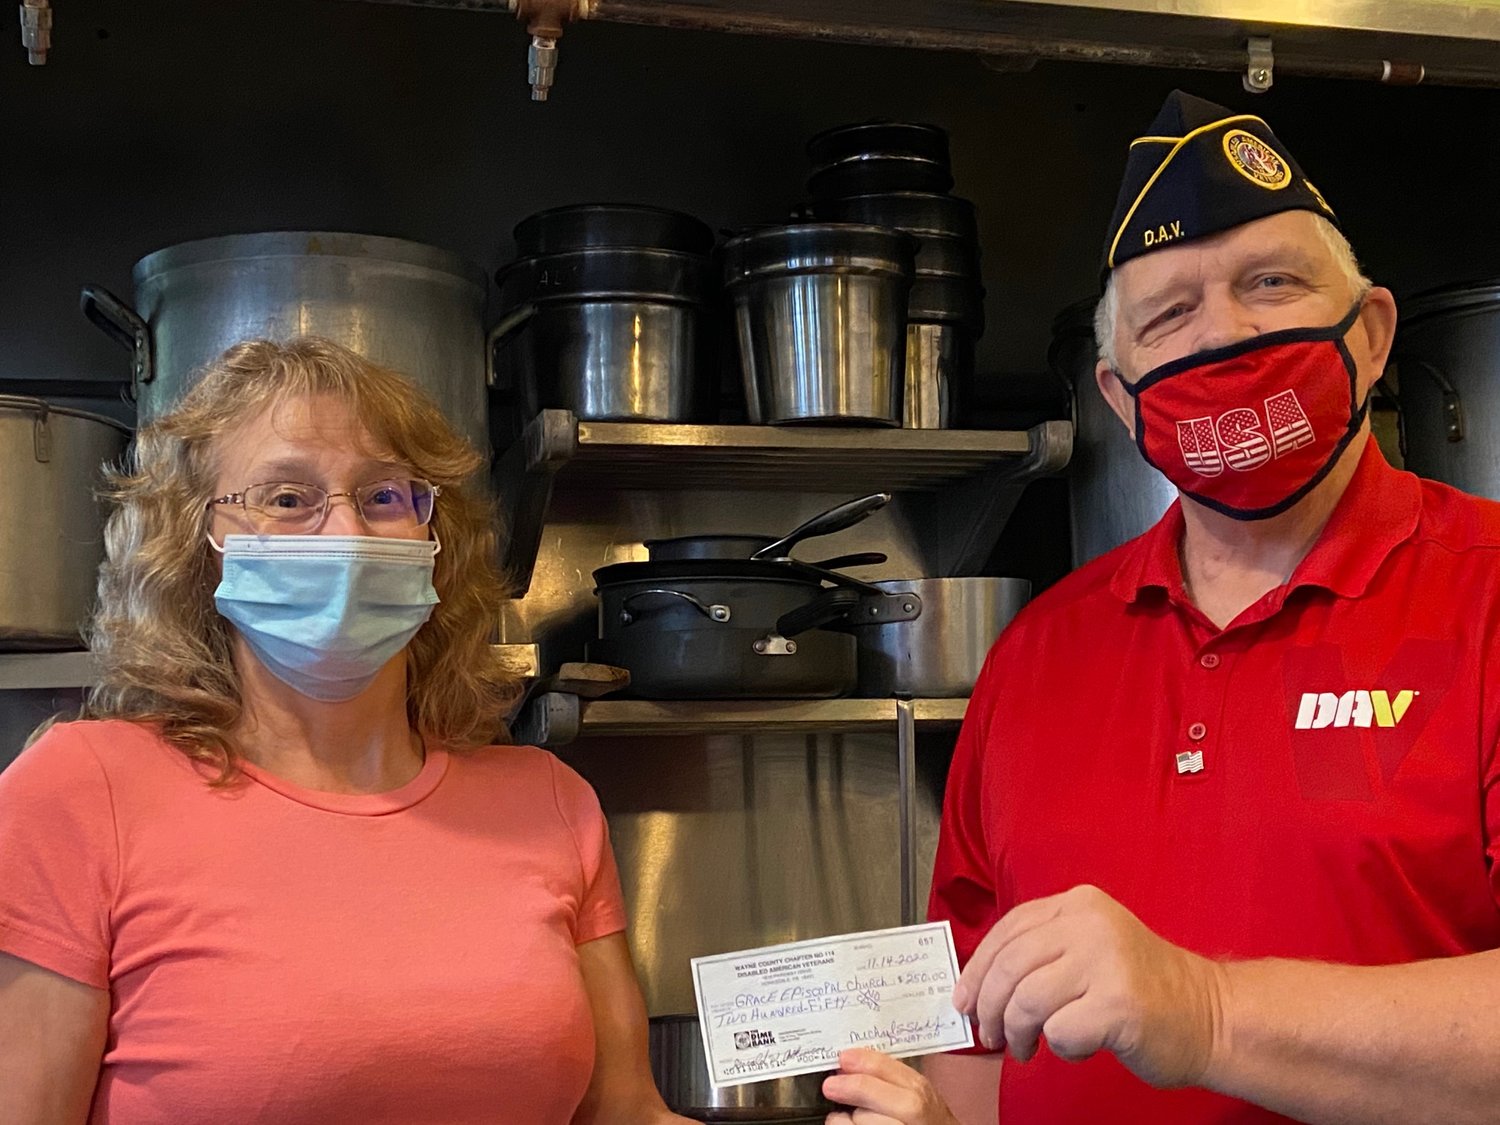 Mike Slish, treasurer of Wayne County Chapter 114 of the Disabled American Veterans, presents a $250 check to Laura Dyser, Thanksgiving Together chairperson, to help support the program.